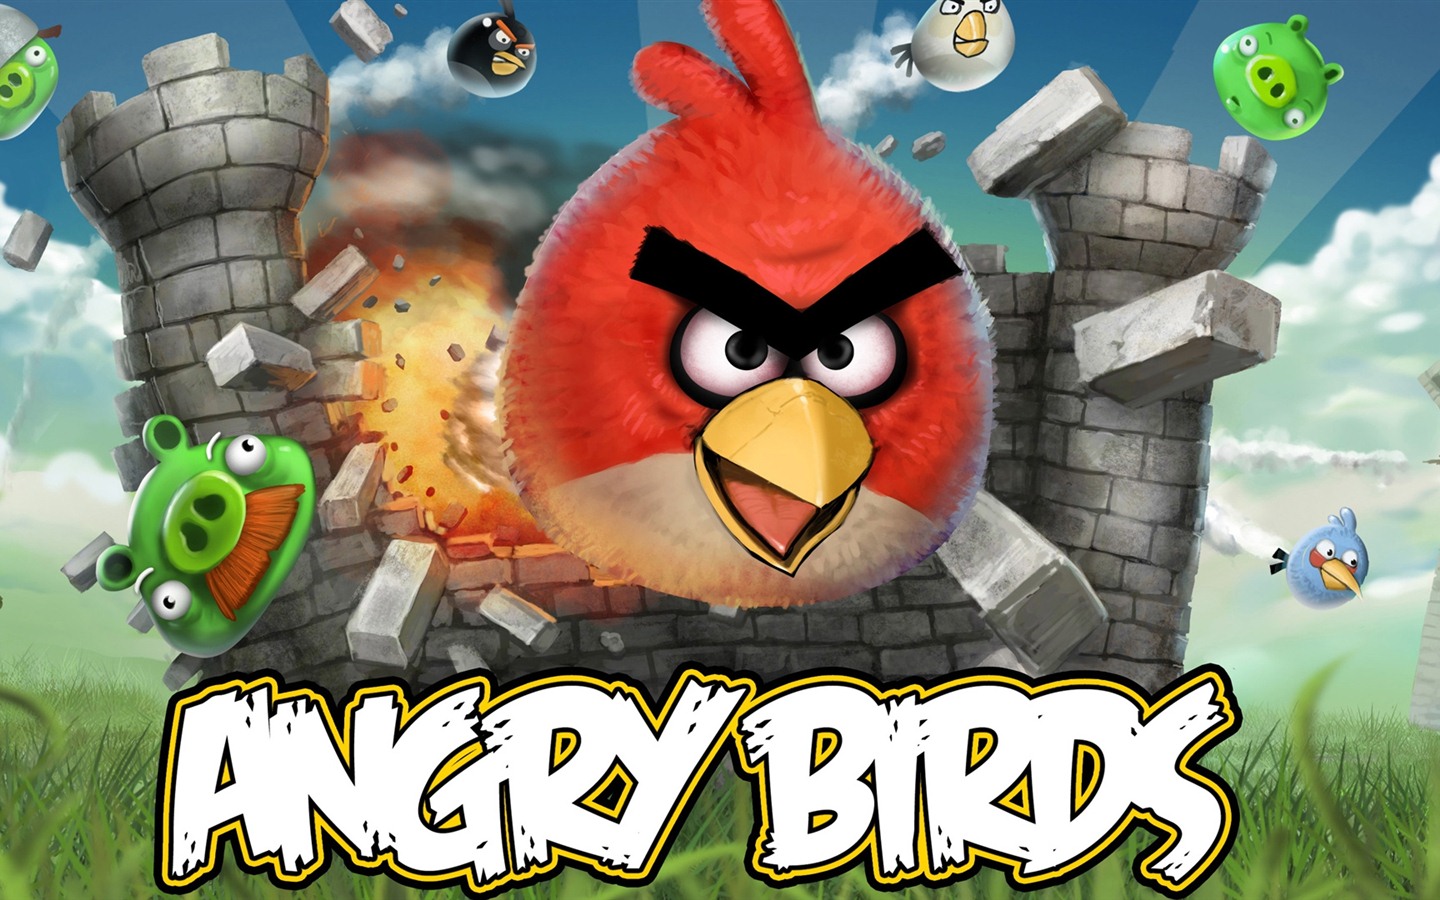 Angry Birds Game Wallpapers #15 - 1440x900